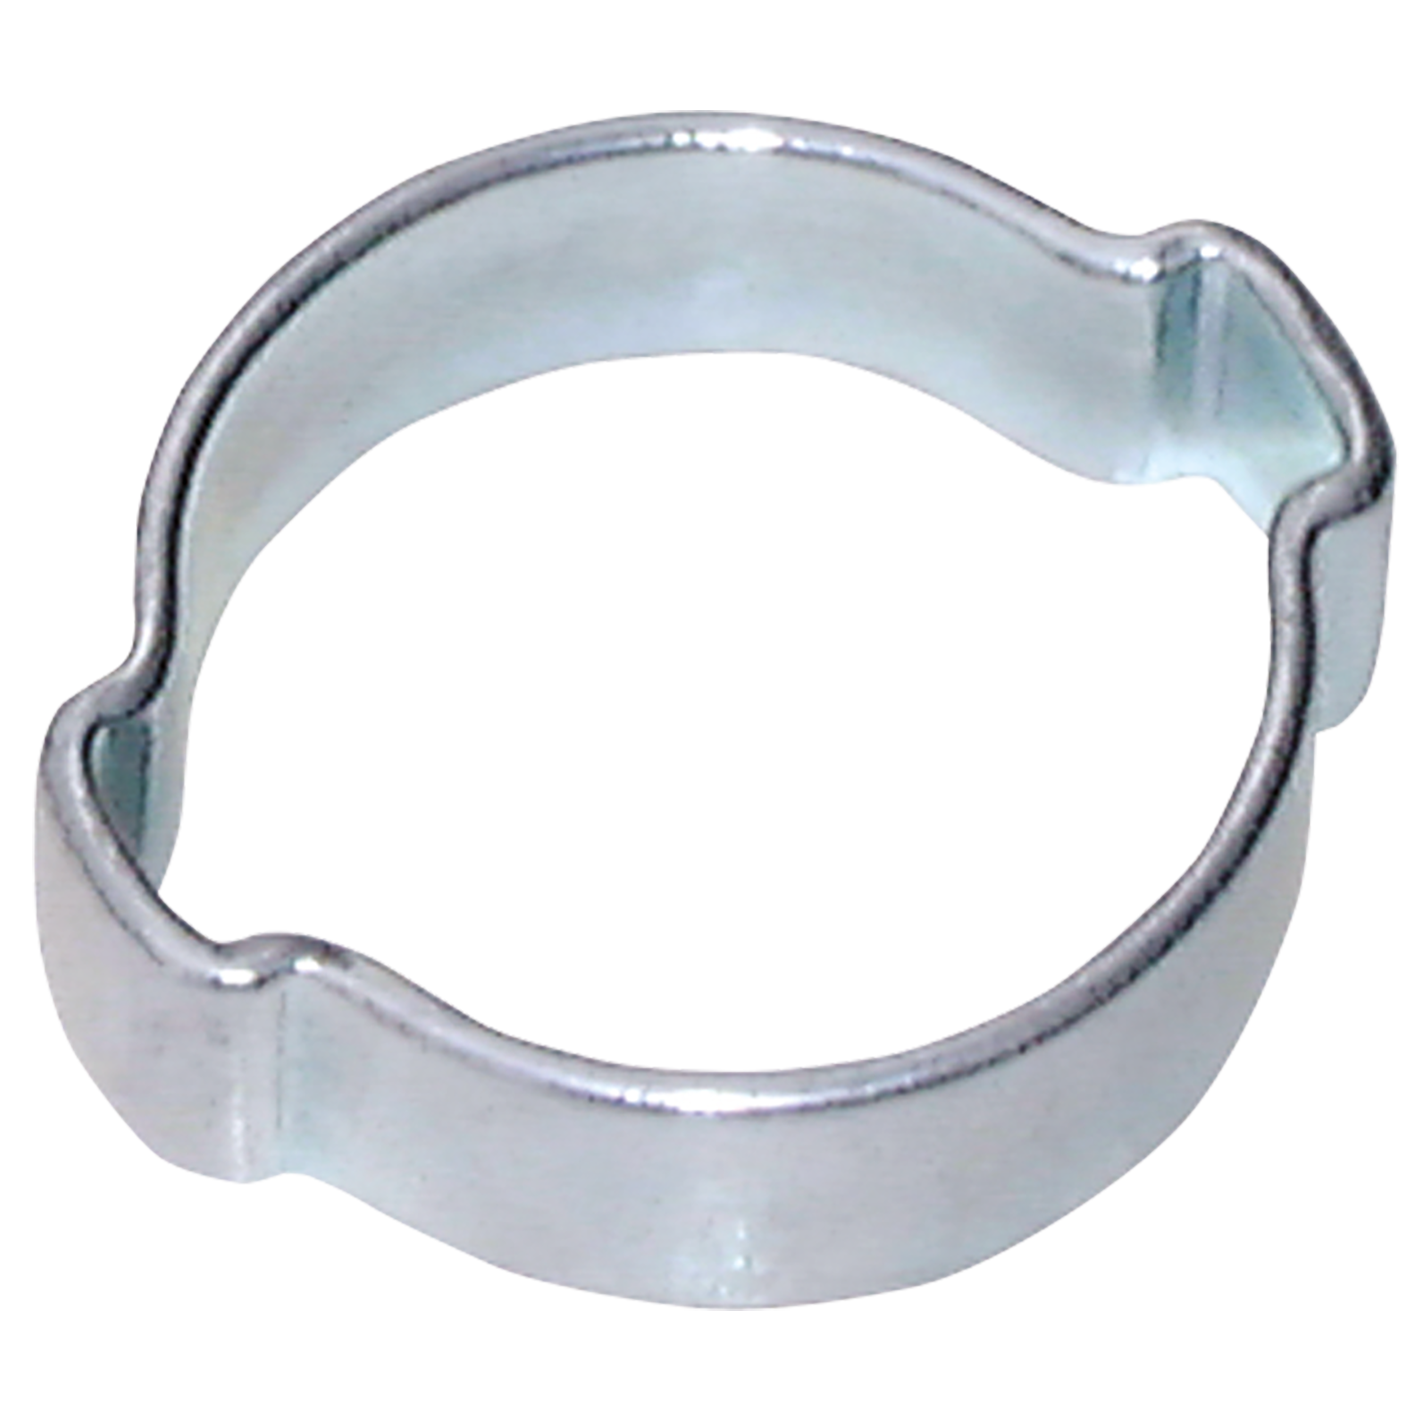 17.0-20.0MM 2-EAR STEEL CLAMP PLATED